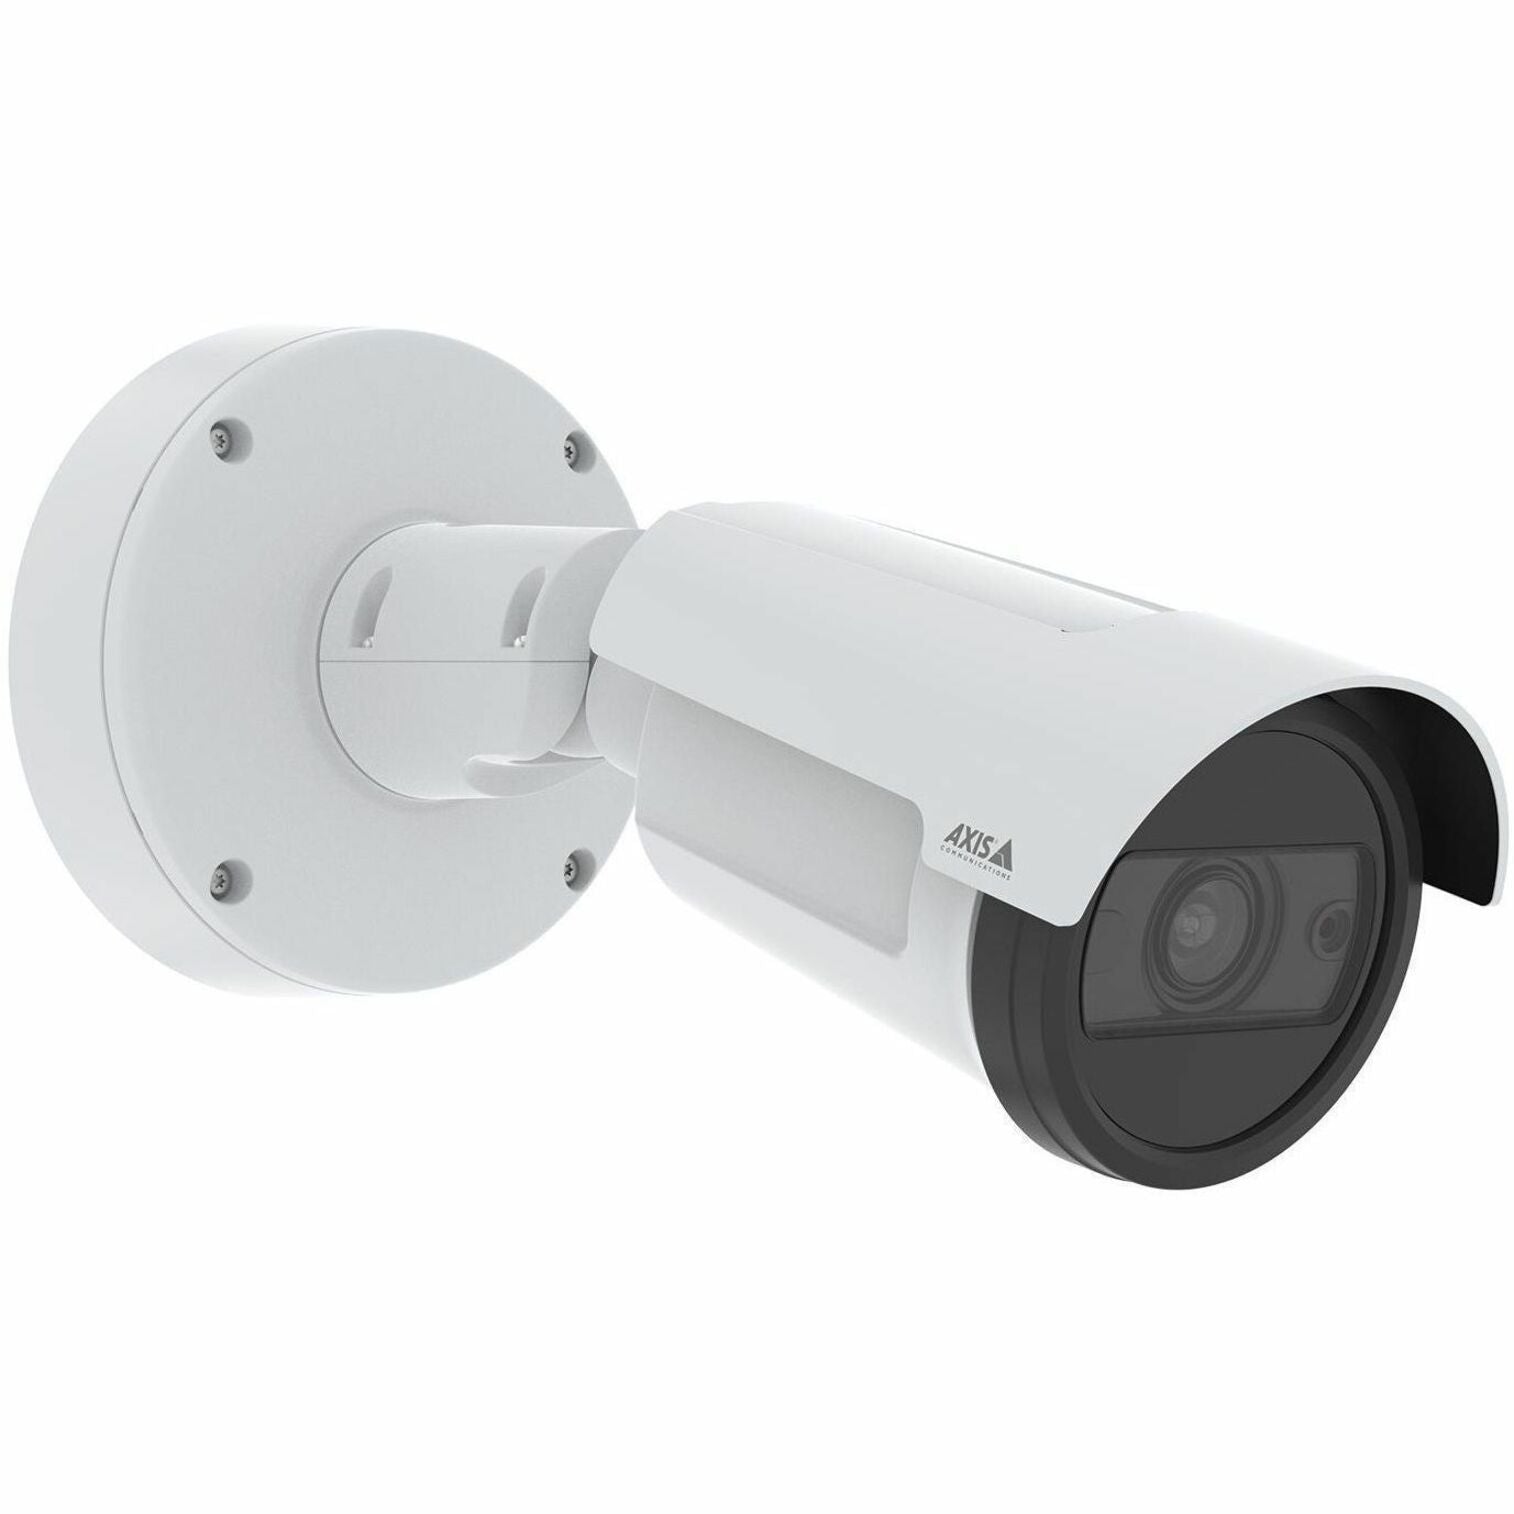 AXIS 02341-001 P1467-LE Network Camera, 5 Megapixel Outdoor Bullet, Color, Monochrome, TAA Compliant